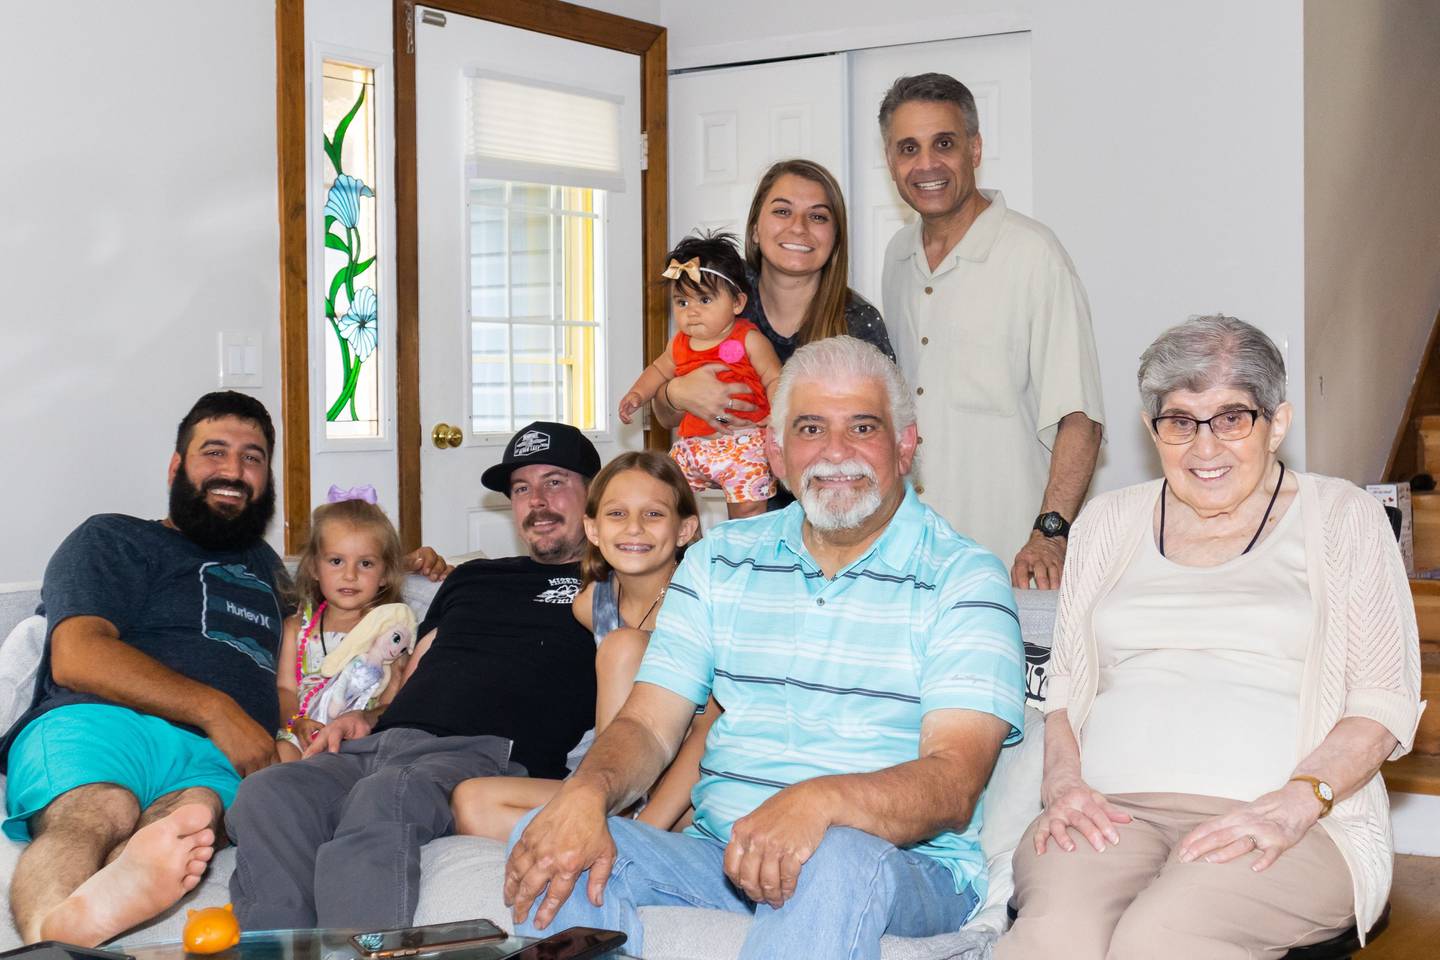 Crystal Lake resident Angelo Pleotis, 64, center, was seriously injured during an accident on July 27, 2022, during which a car crashed through his garage and into the home itself. Pleotis' family said he may be paralyzed for life now.